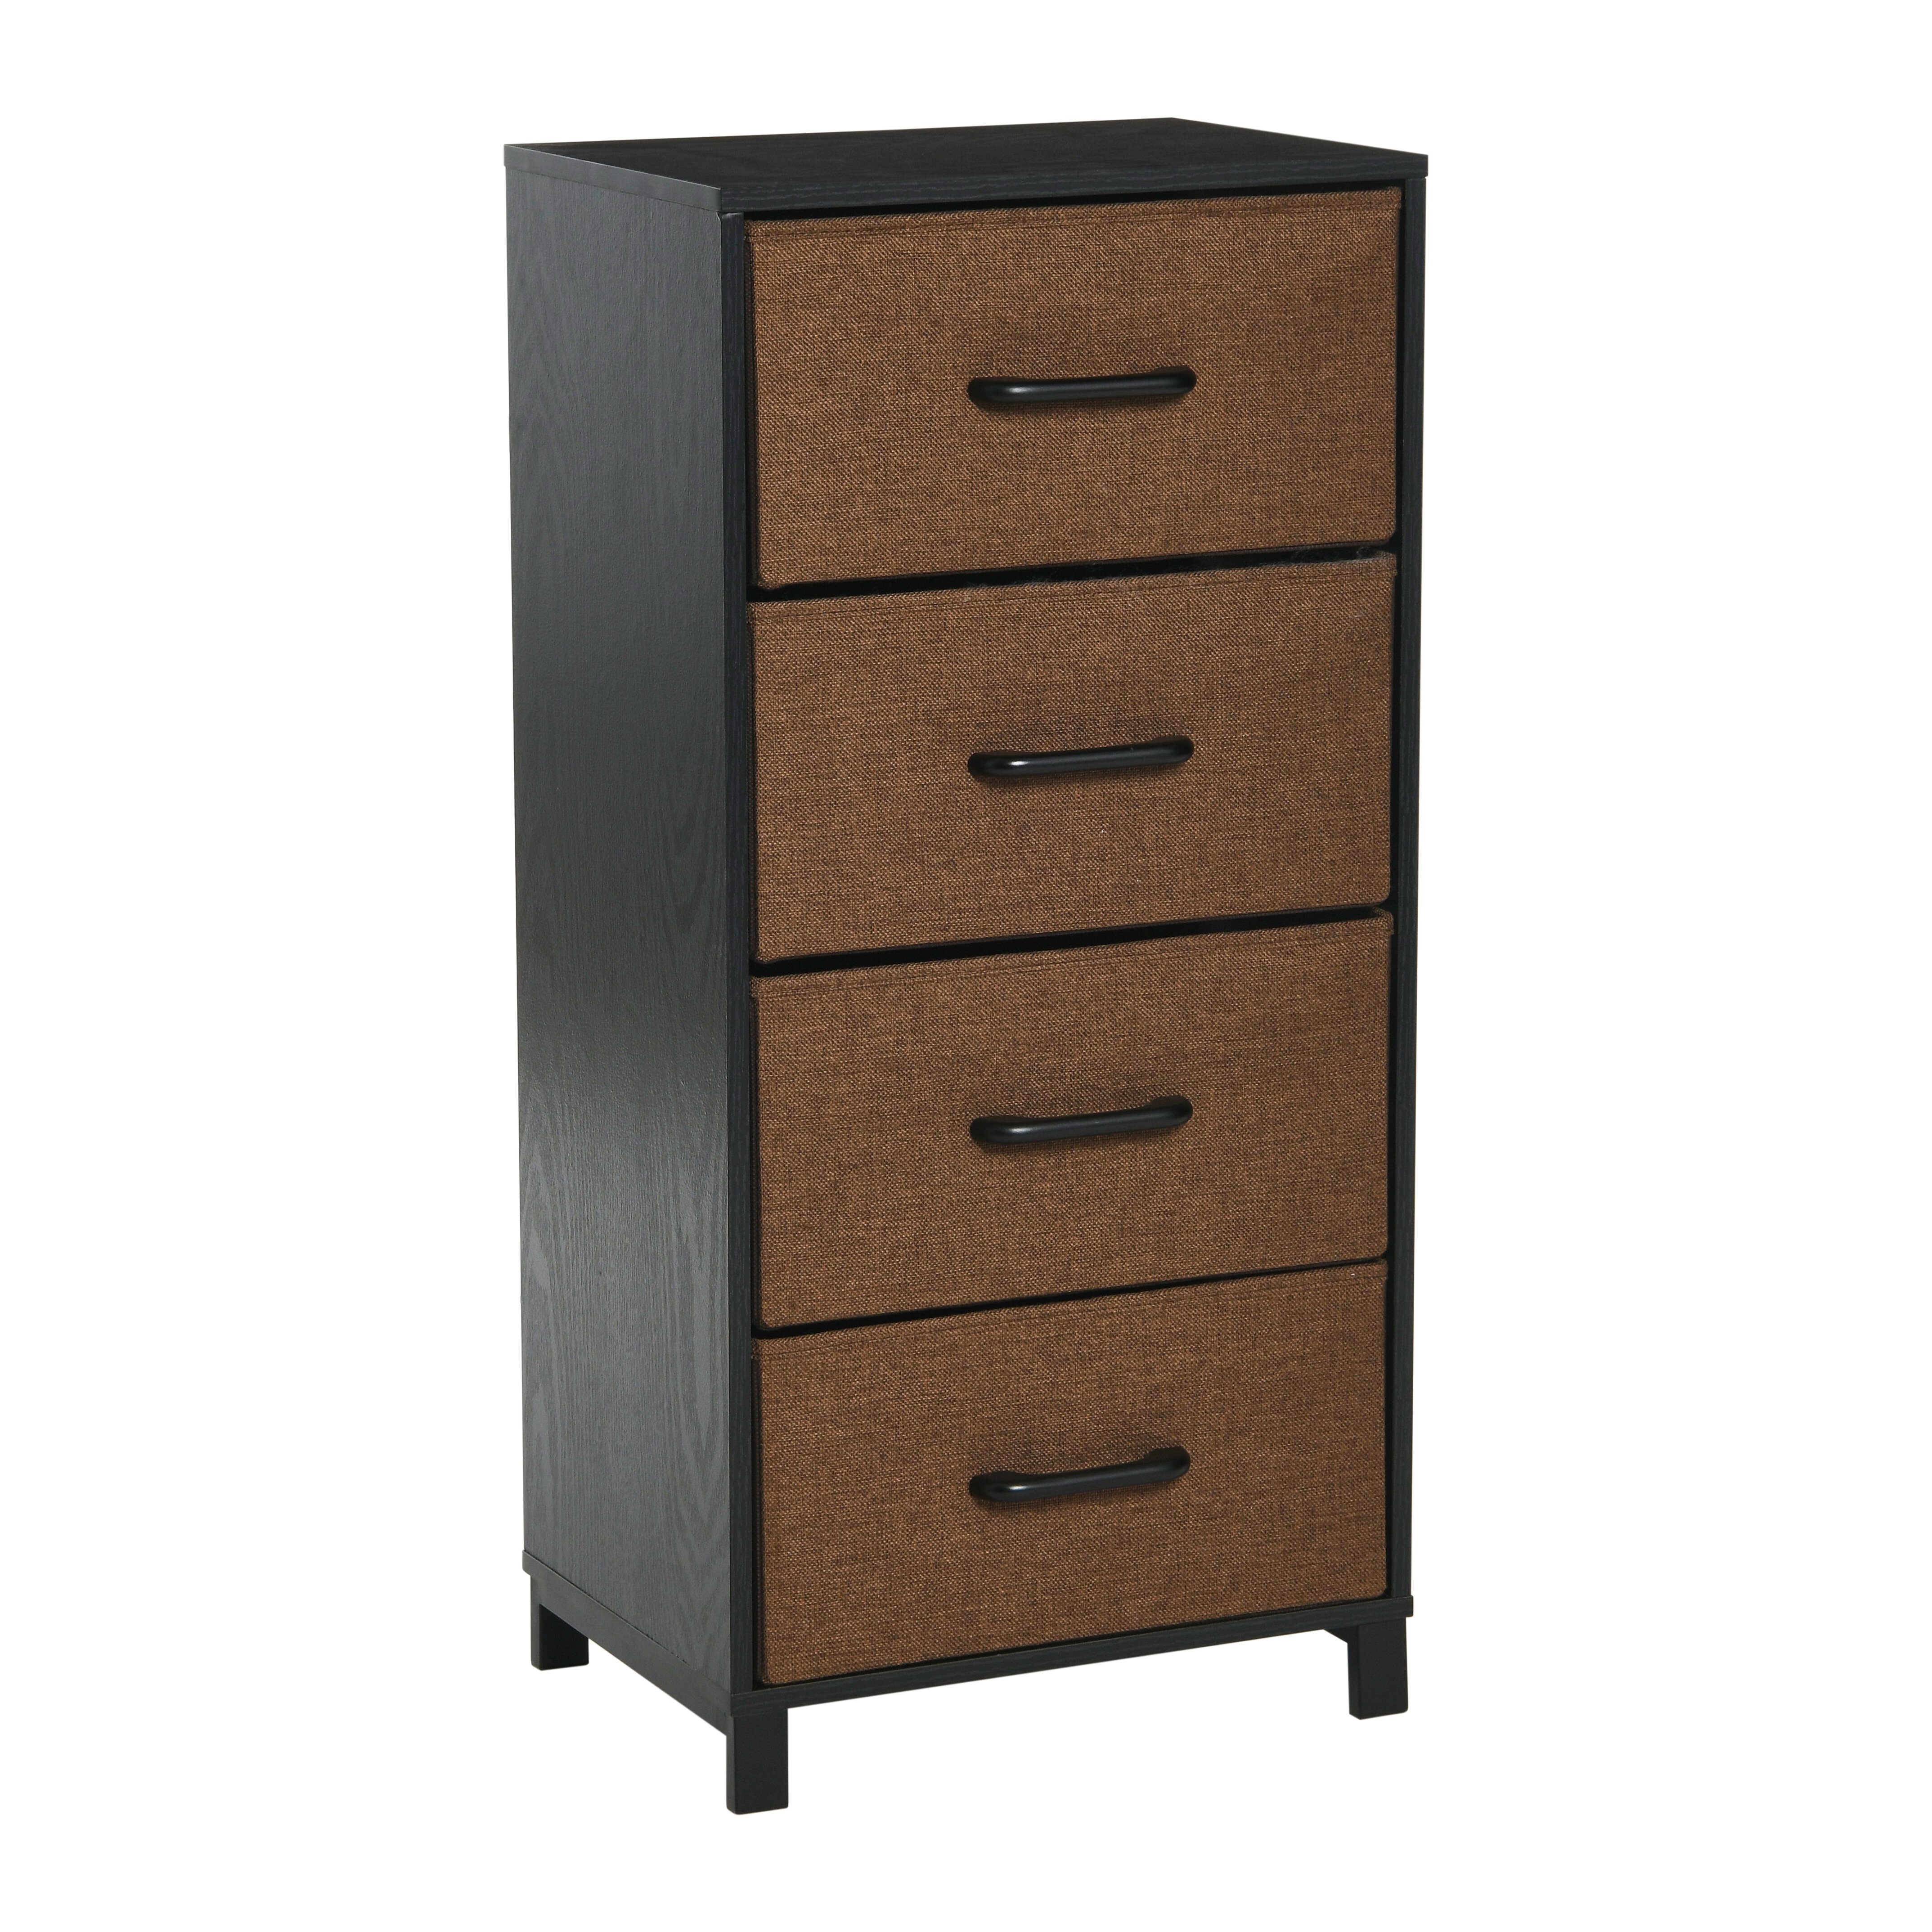 Storage Cabinets With Drawers Visualhunt